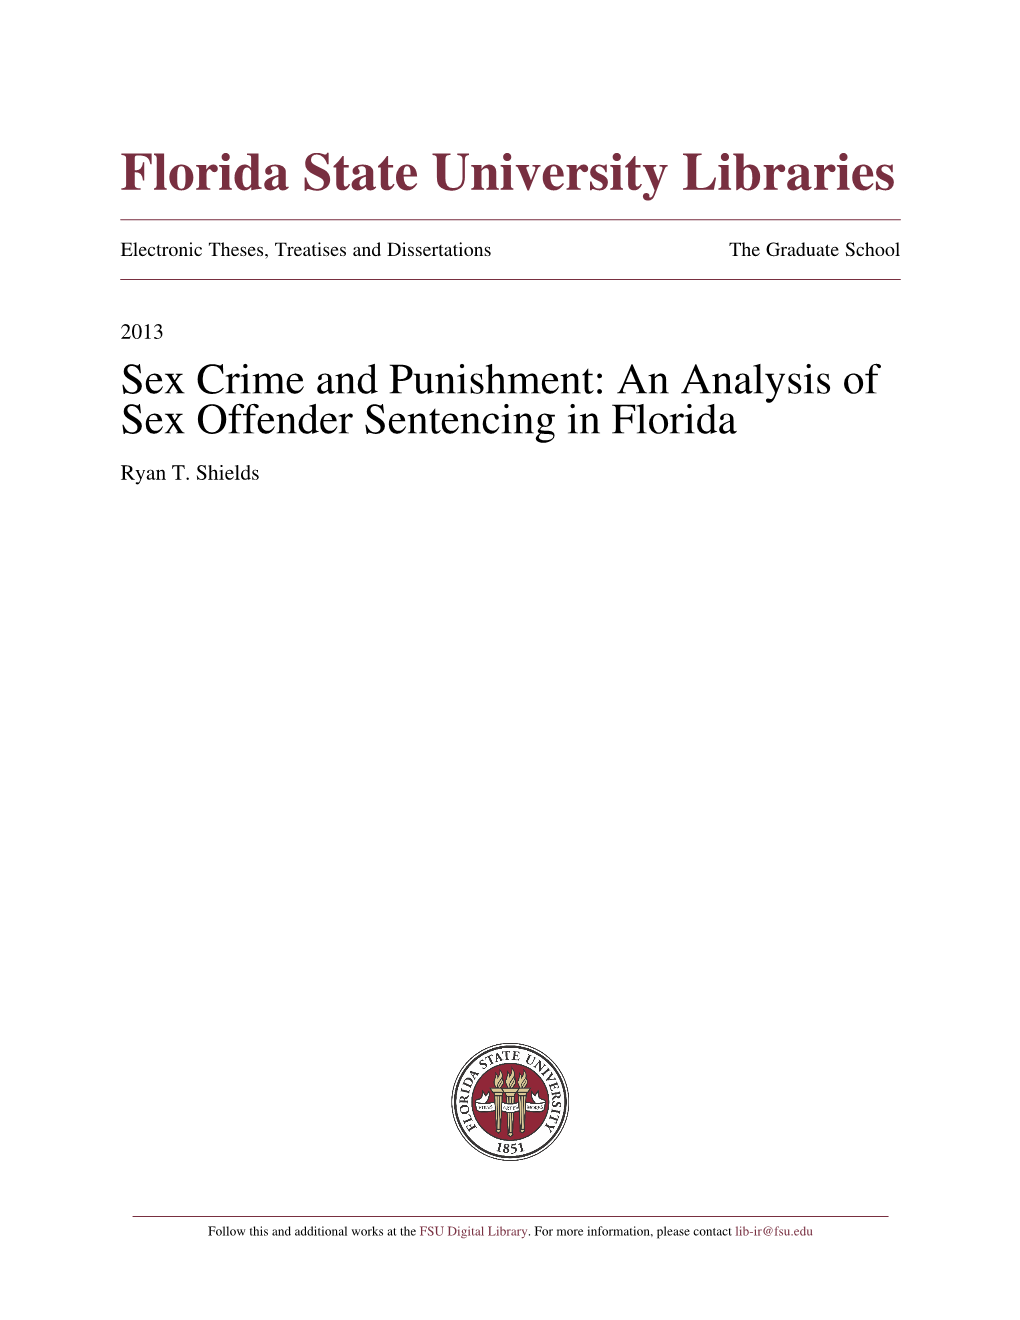 Sex Crime and Punishment: an Analysis of Sex Offender Sentencing in Florida Ryan T